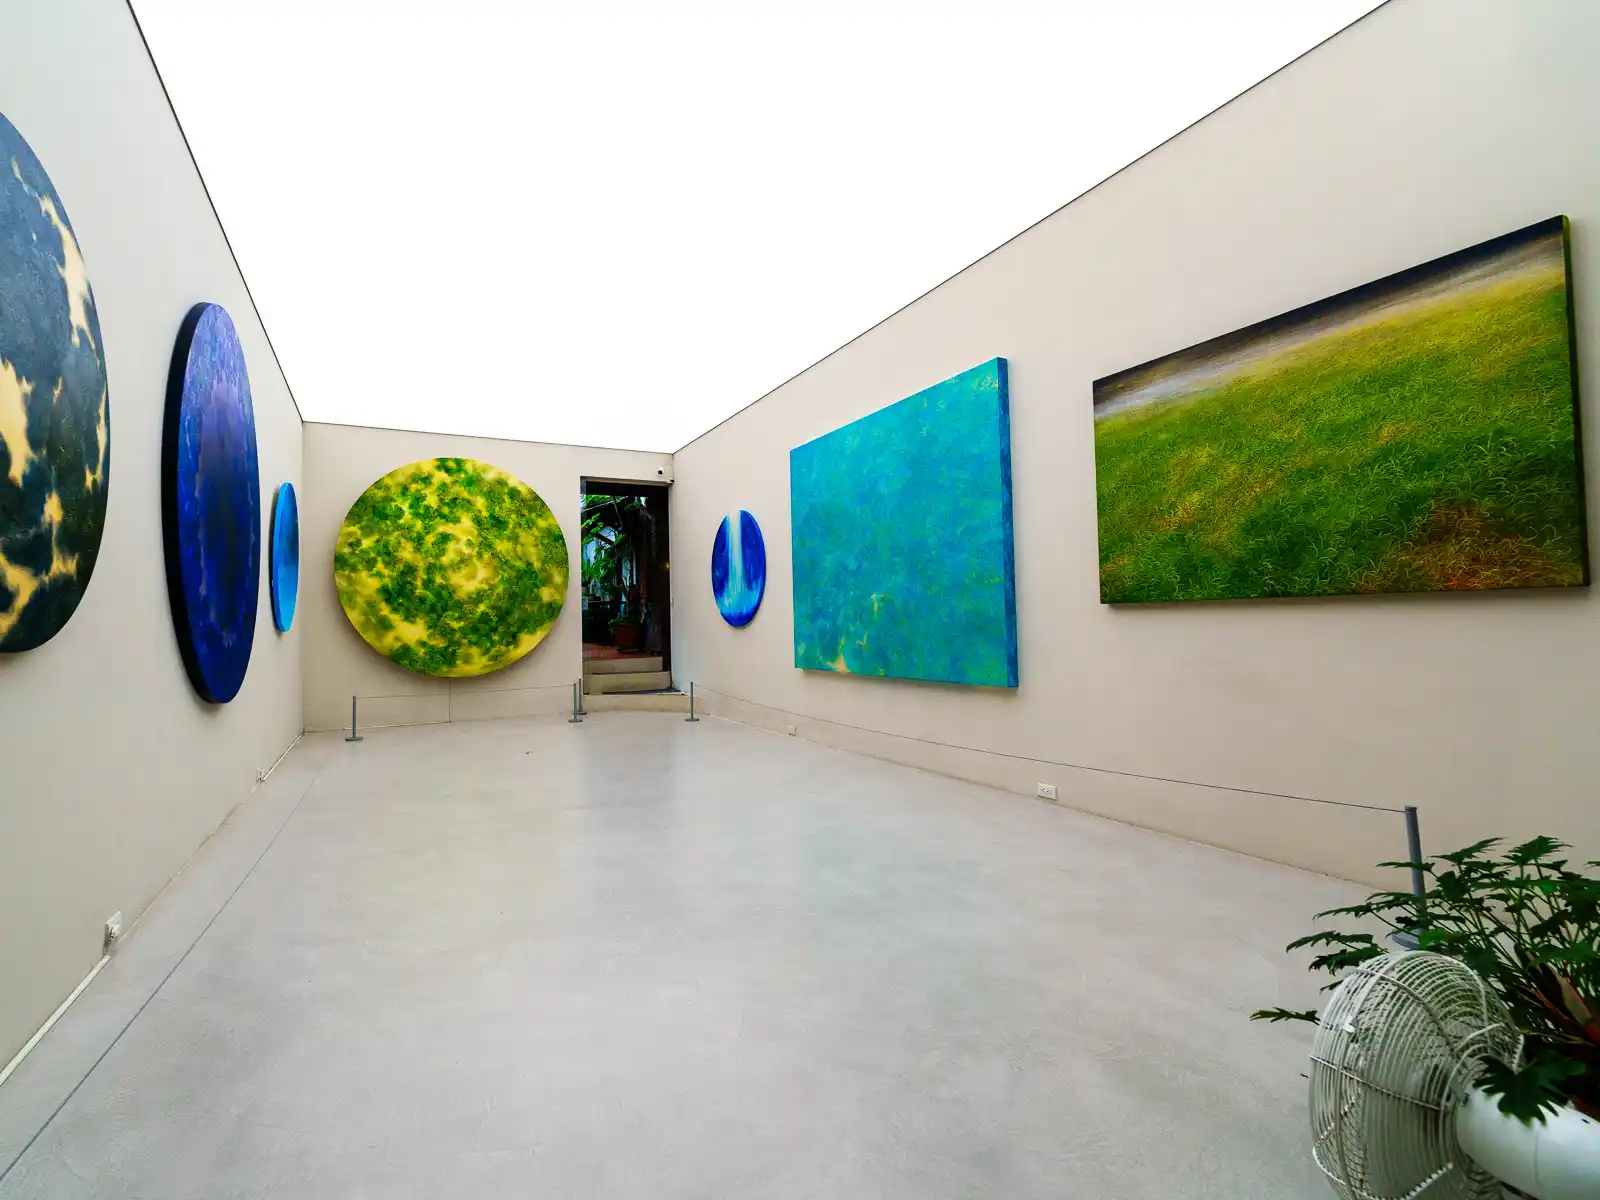 Several colorful paintings hang on the walls in this long white-walled room at Su Chiang Art Museum.